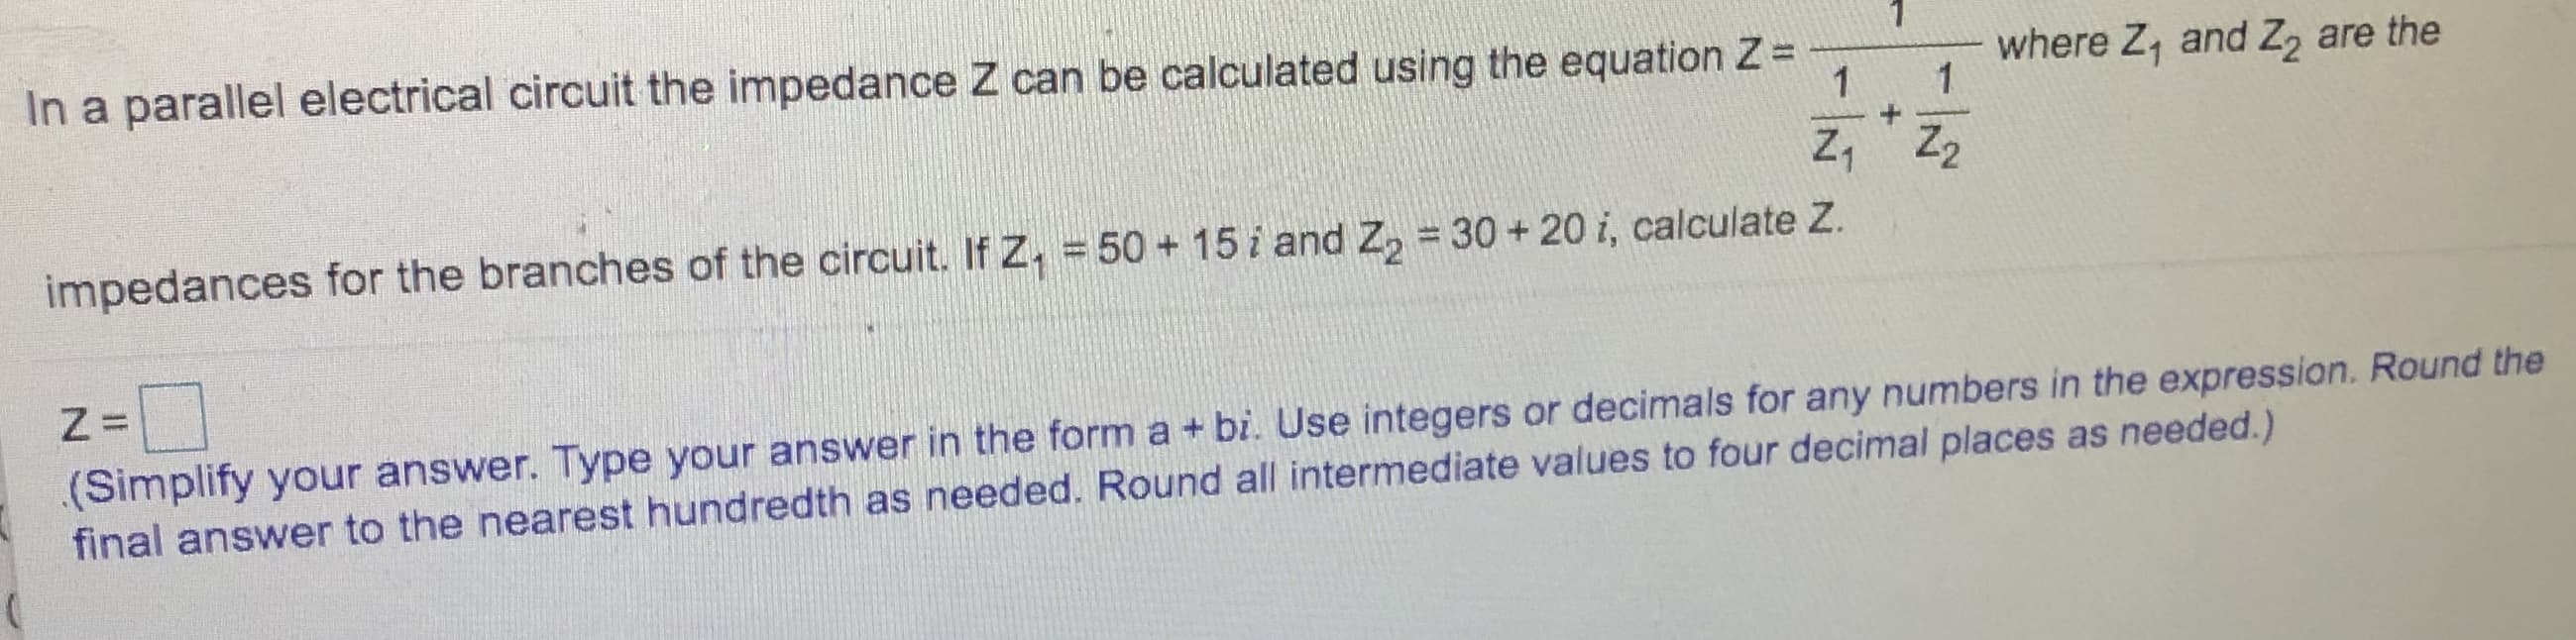 In a parallel electrical circuit the impedance Z can be calculated using the equation Z=
where Z, and Z, are the
Z, Z2
impedances for the branches of the circuit. If Z, = 50+ 15 i and Z, =30+ 20 i, calculate Z.
(Simplify your answer. Type your answer in the form a + bi. Use integers or decimals for any numbers in the expression. Round the
final answer to the nearest hundredth as needed. Round all intermediate values to four decimal places as needed.)
